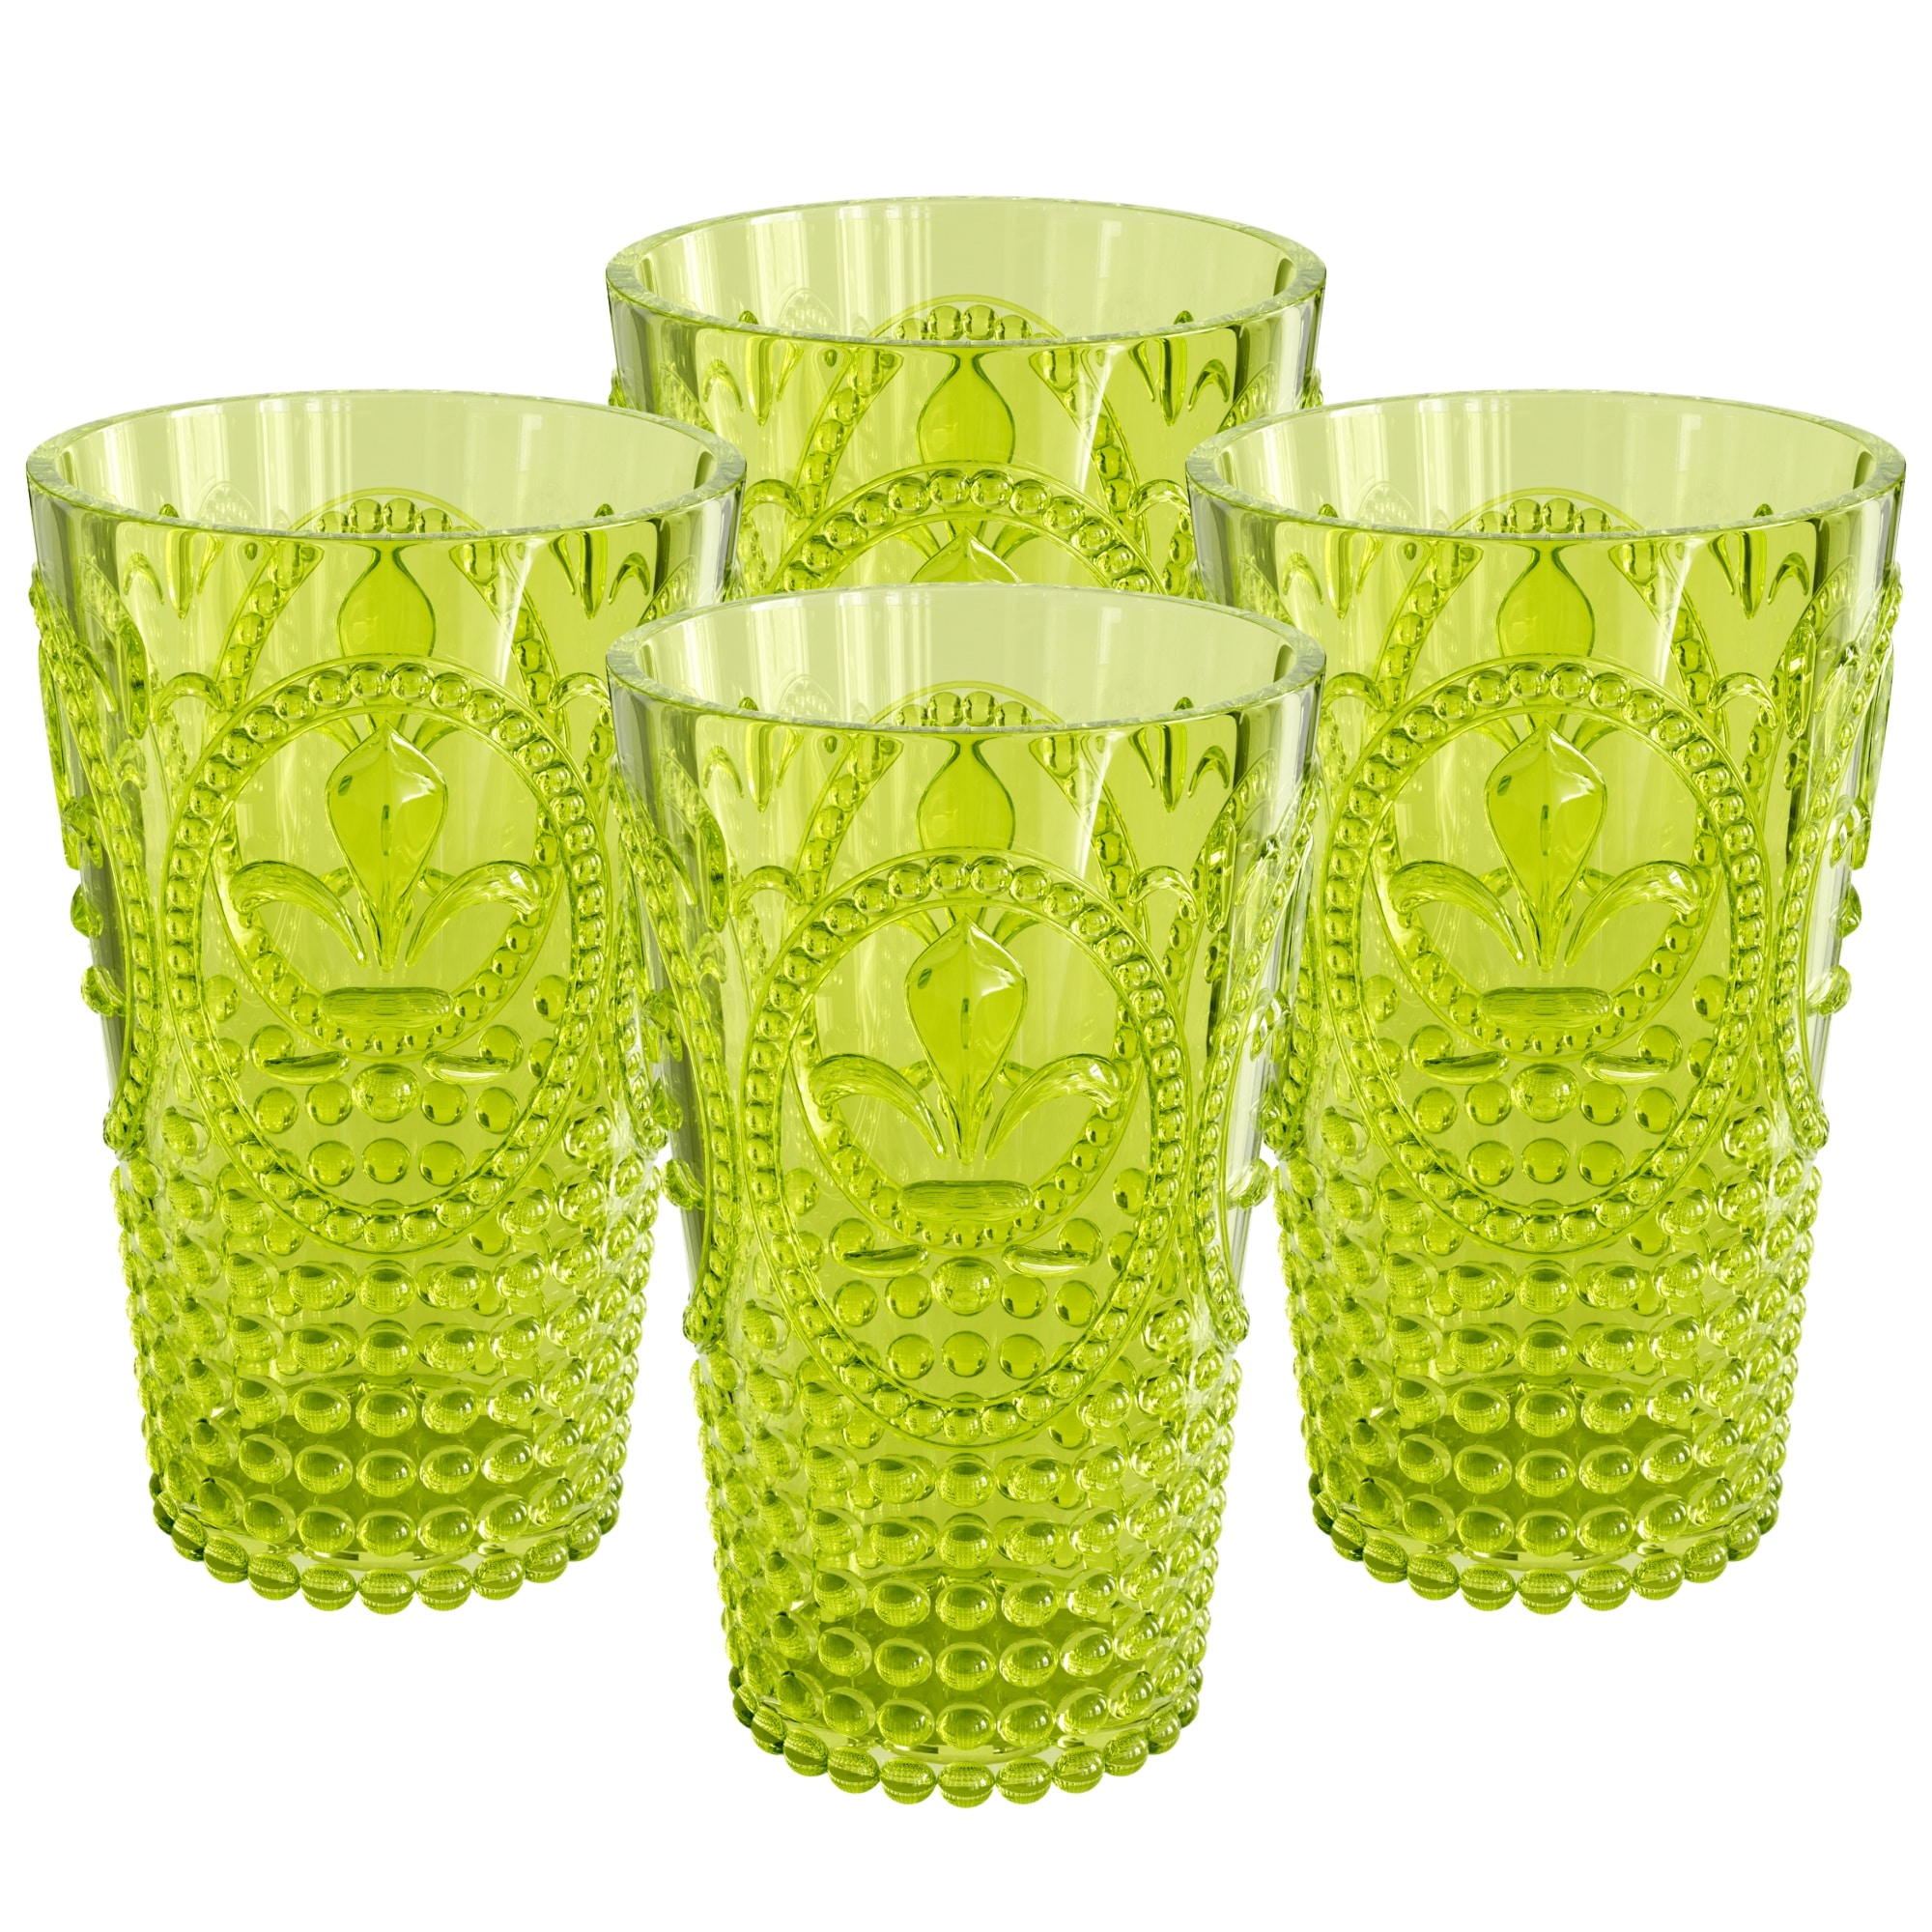 https://ak1.ostkcdn.com/images/products/is/images/direct/30d5ca4fecb65bfd1a63abb2e1cf90cfeb0a7cfa/Elle-Decor-Acrylic-Water-HiBall-Tumblers%2C-Set-of-4.jpg